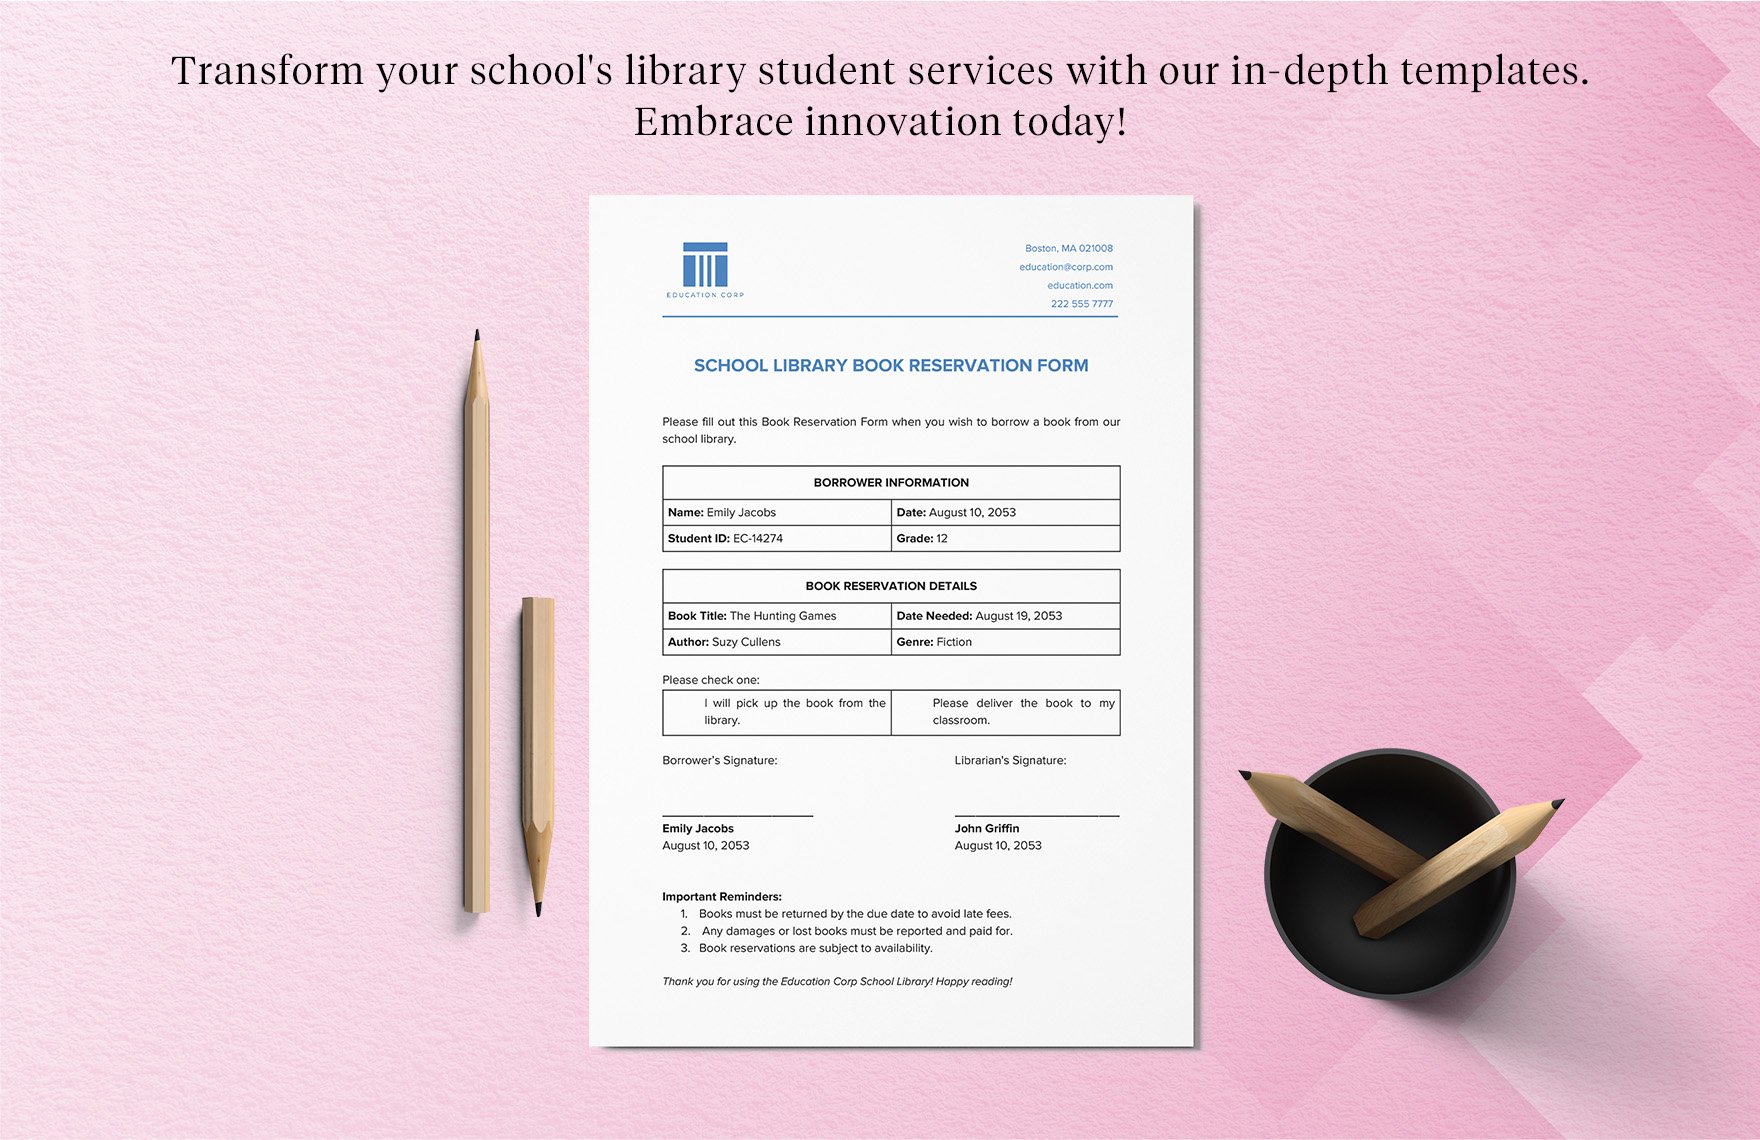 School Library Book Reservation Form Template